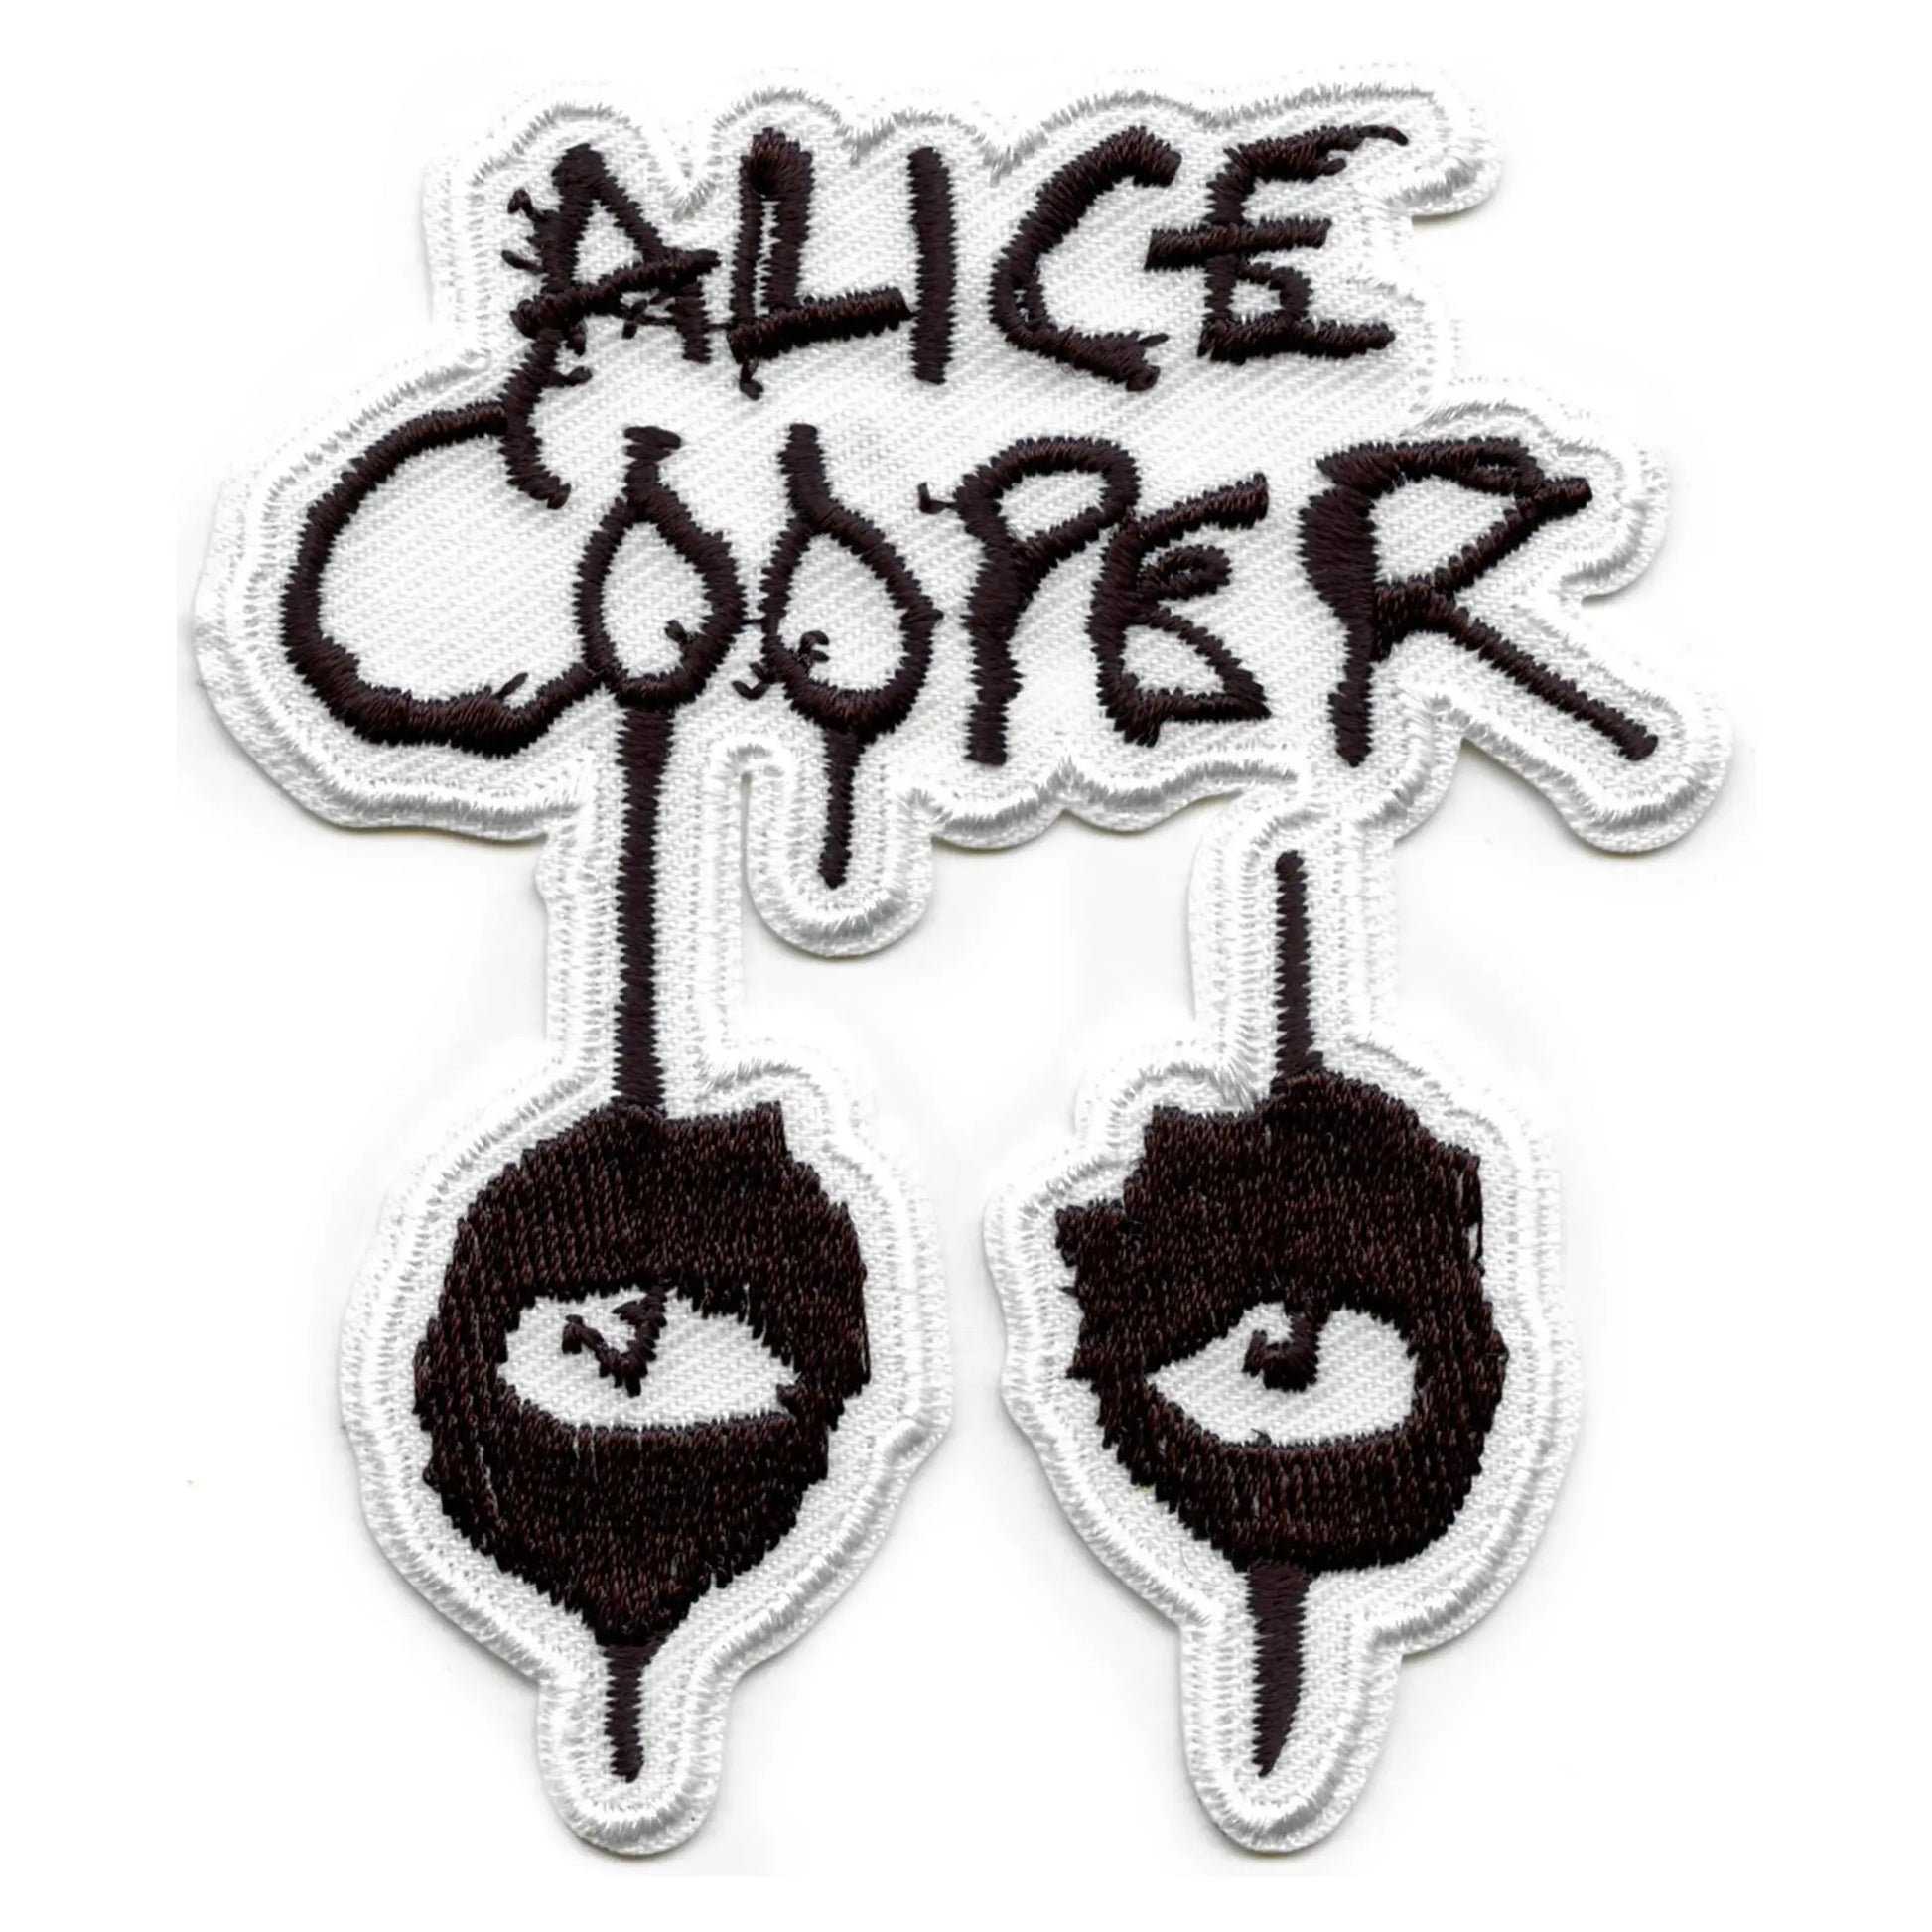 Alice Cooper Iconic Eyes Logo Patch Name Embroidered Iron On 